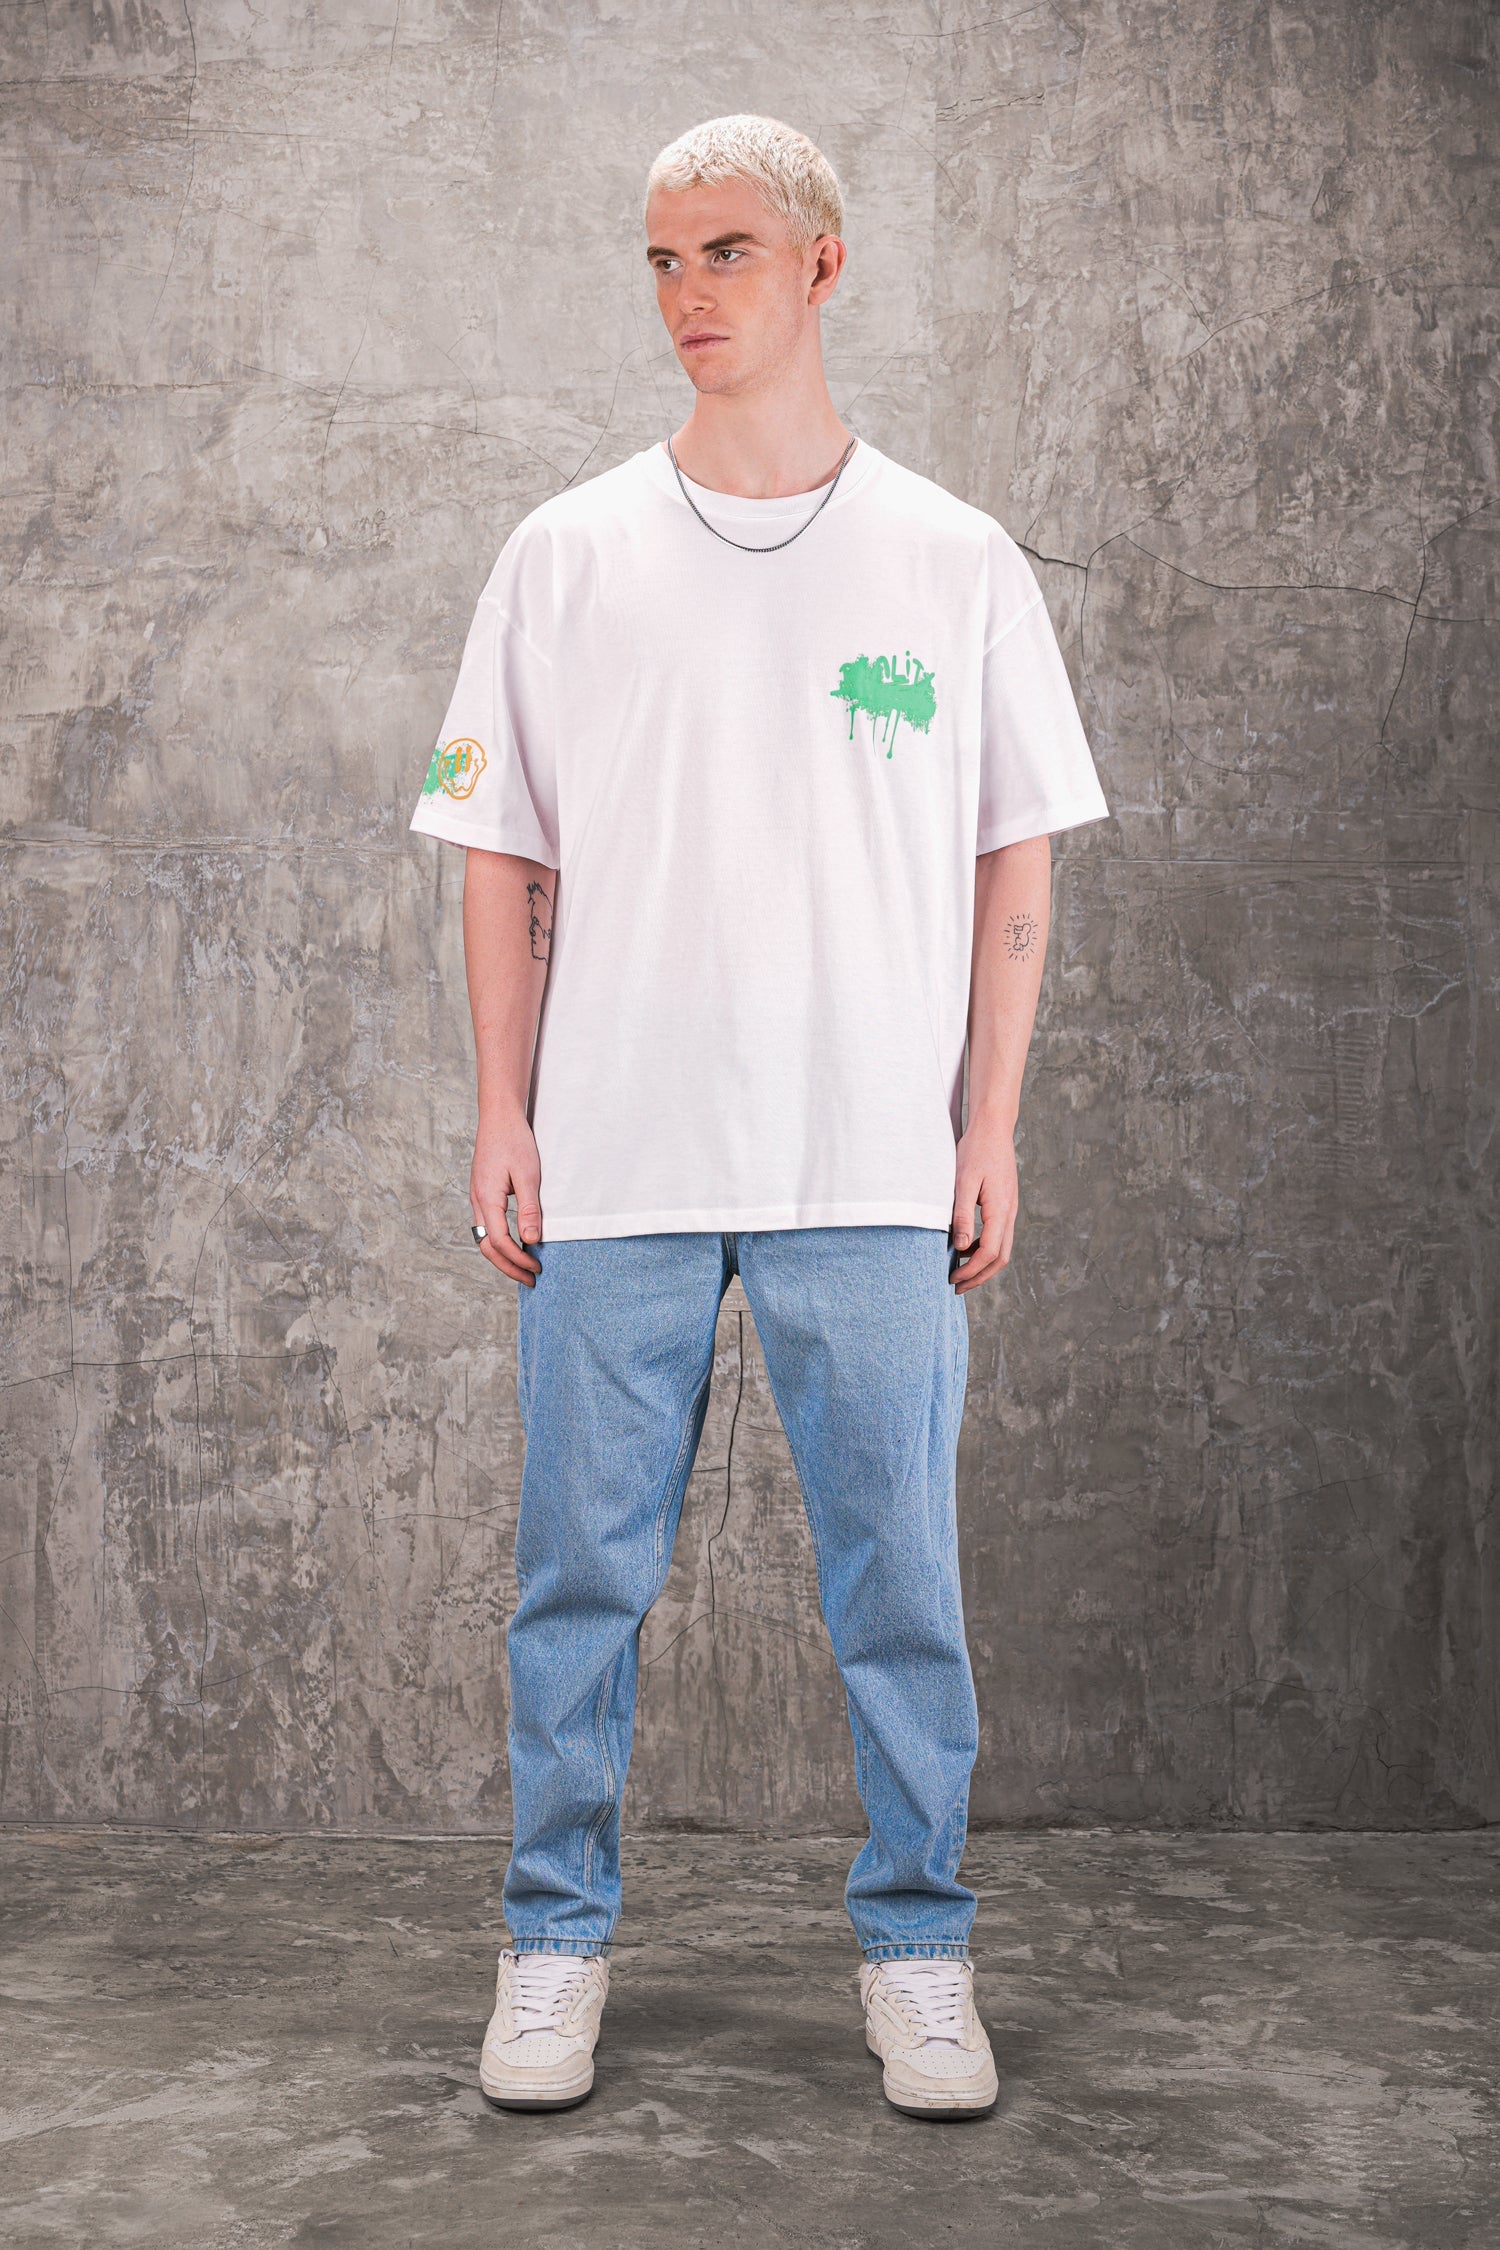 Lost Reality 240GSM Oversized Tee - White - UNEFFECTED STUDIOS® - T-shirt - UNEFFECTED STUDIOS®